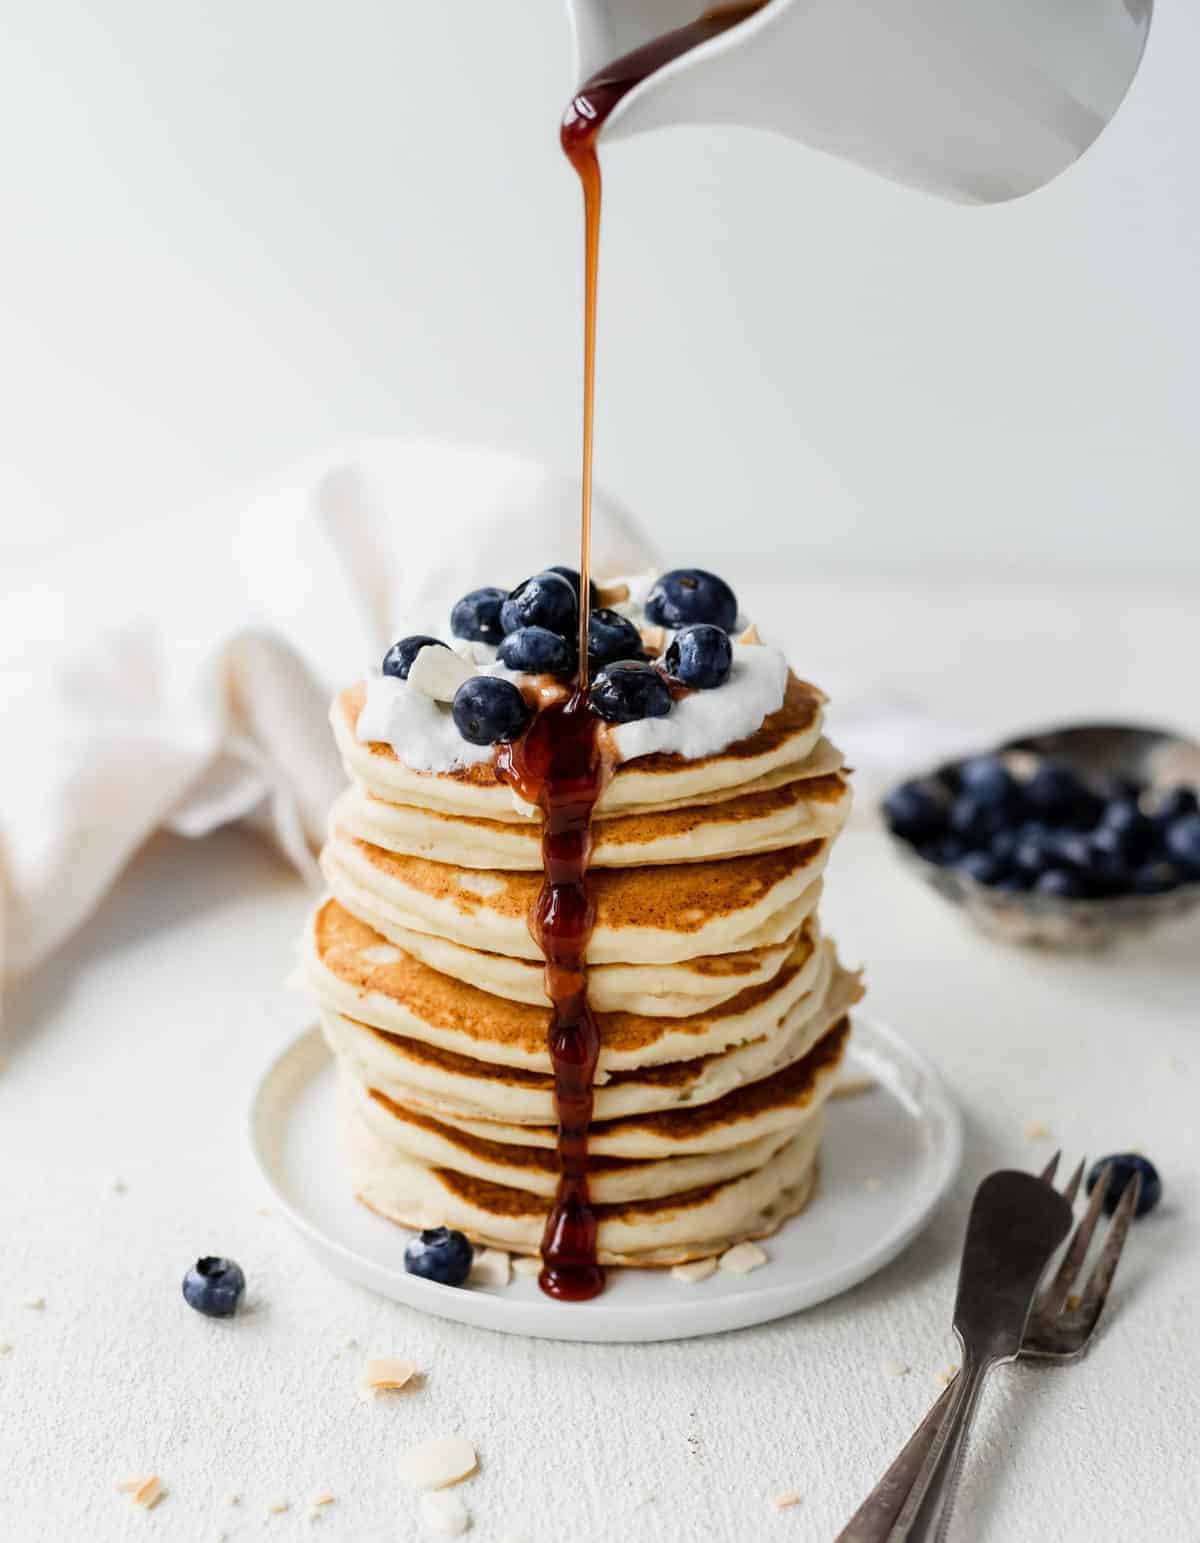 Maple syrup being poured over a stack of ricotta pancakes on a plate.